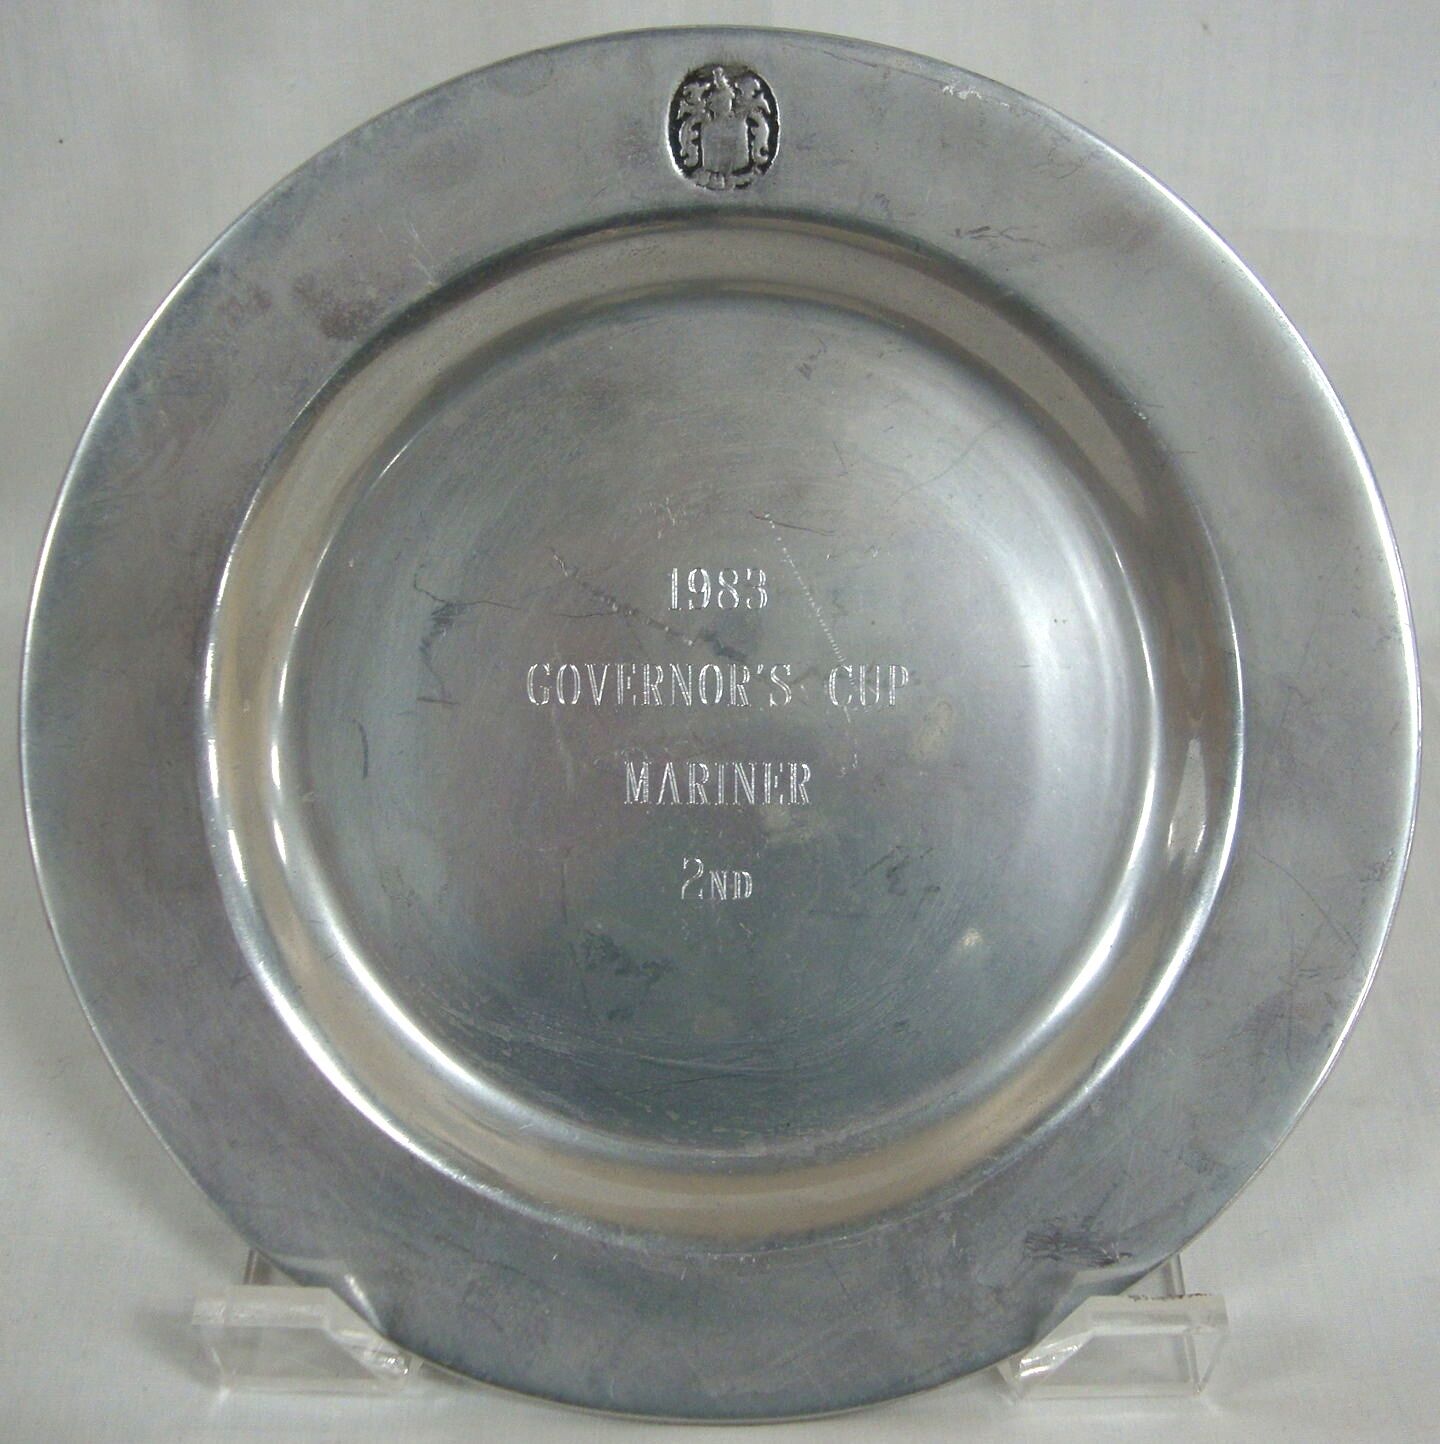 RYC RIVERTON YACHT CLUB NEW JERSEY GOVERNORS CUP VNTG PEWTER AWARD 7 3/4\